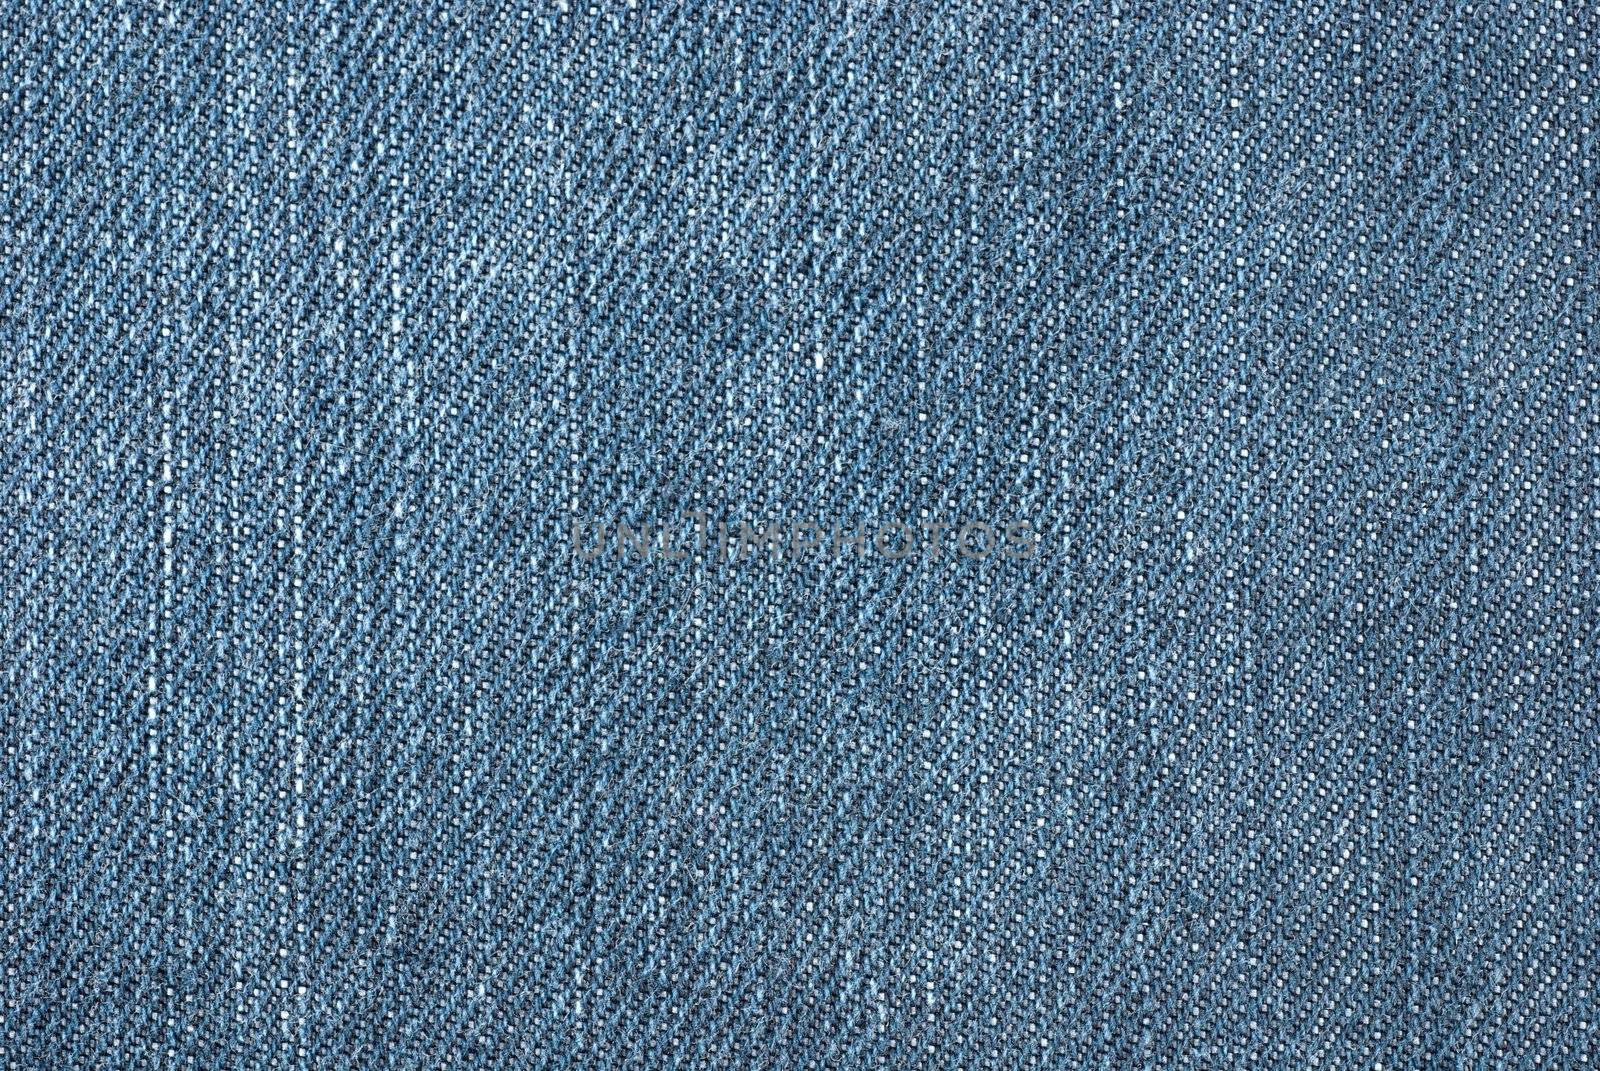 Blue denim jean cloth material for backgrounds